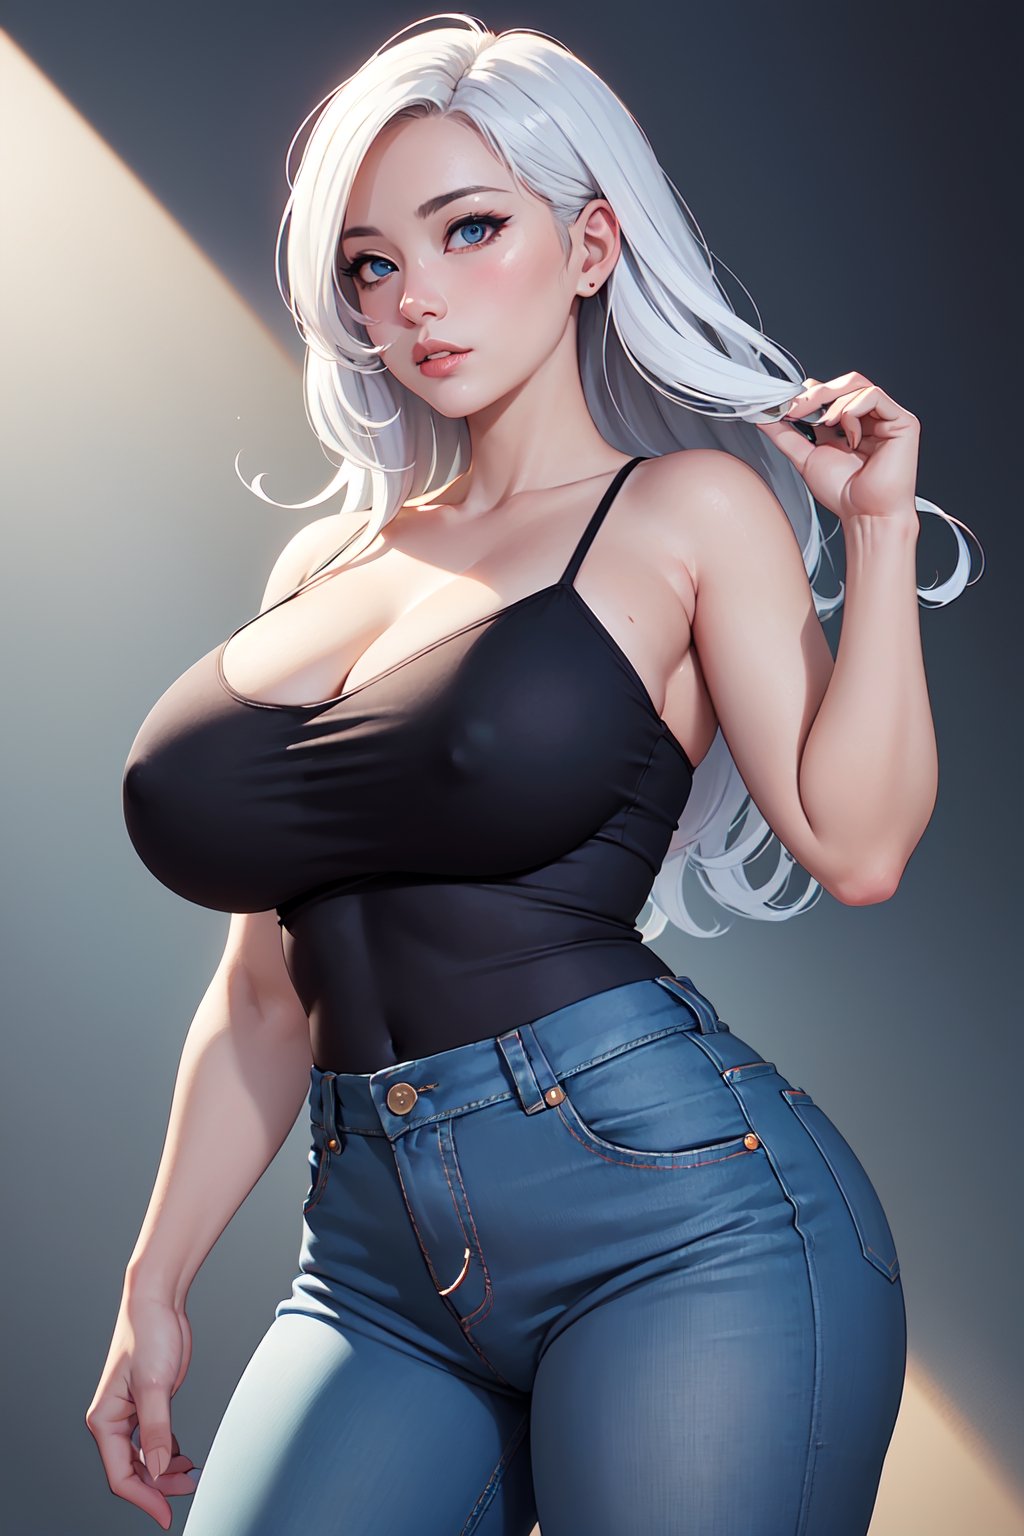 Anime Boobs  What Would Amine Tits Look Like In Real Life? - theCHIVE